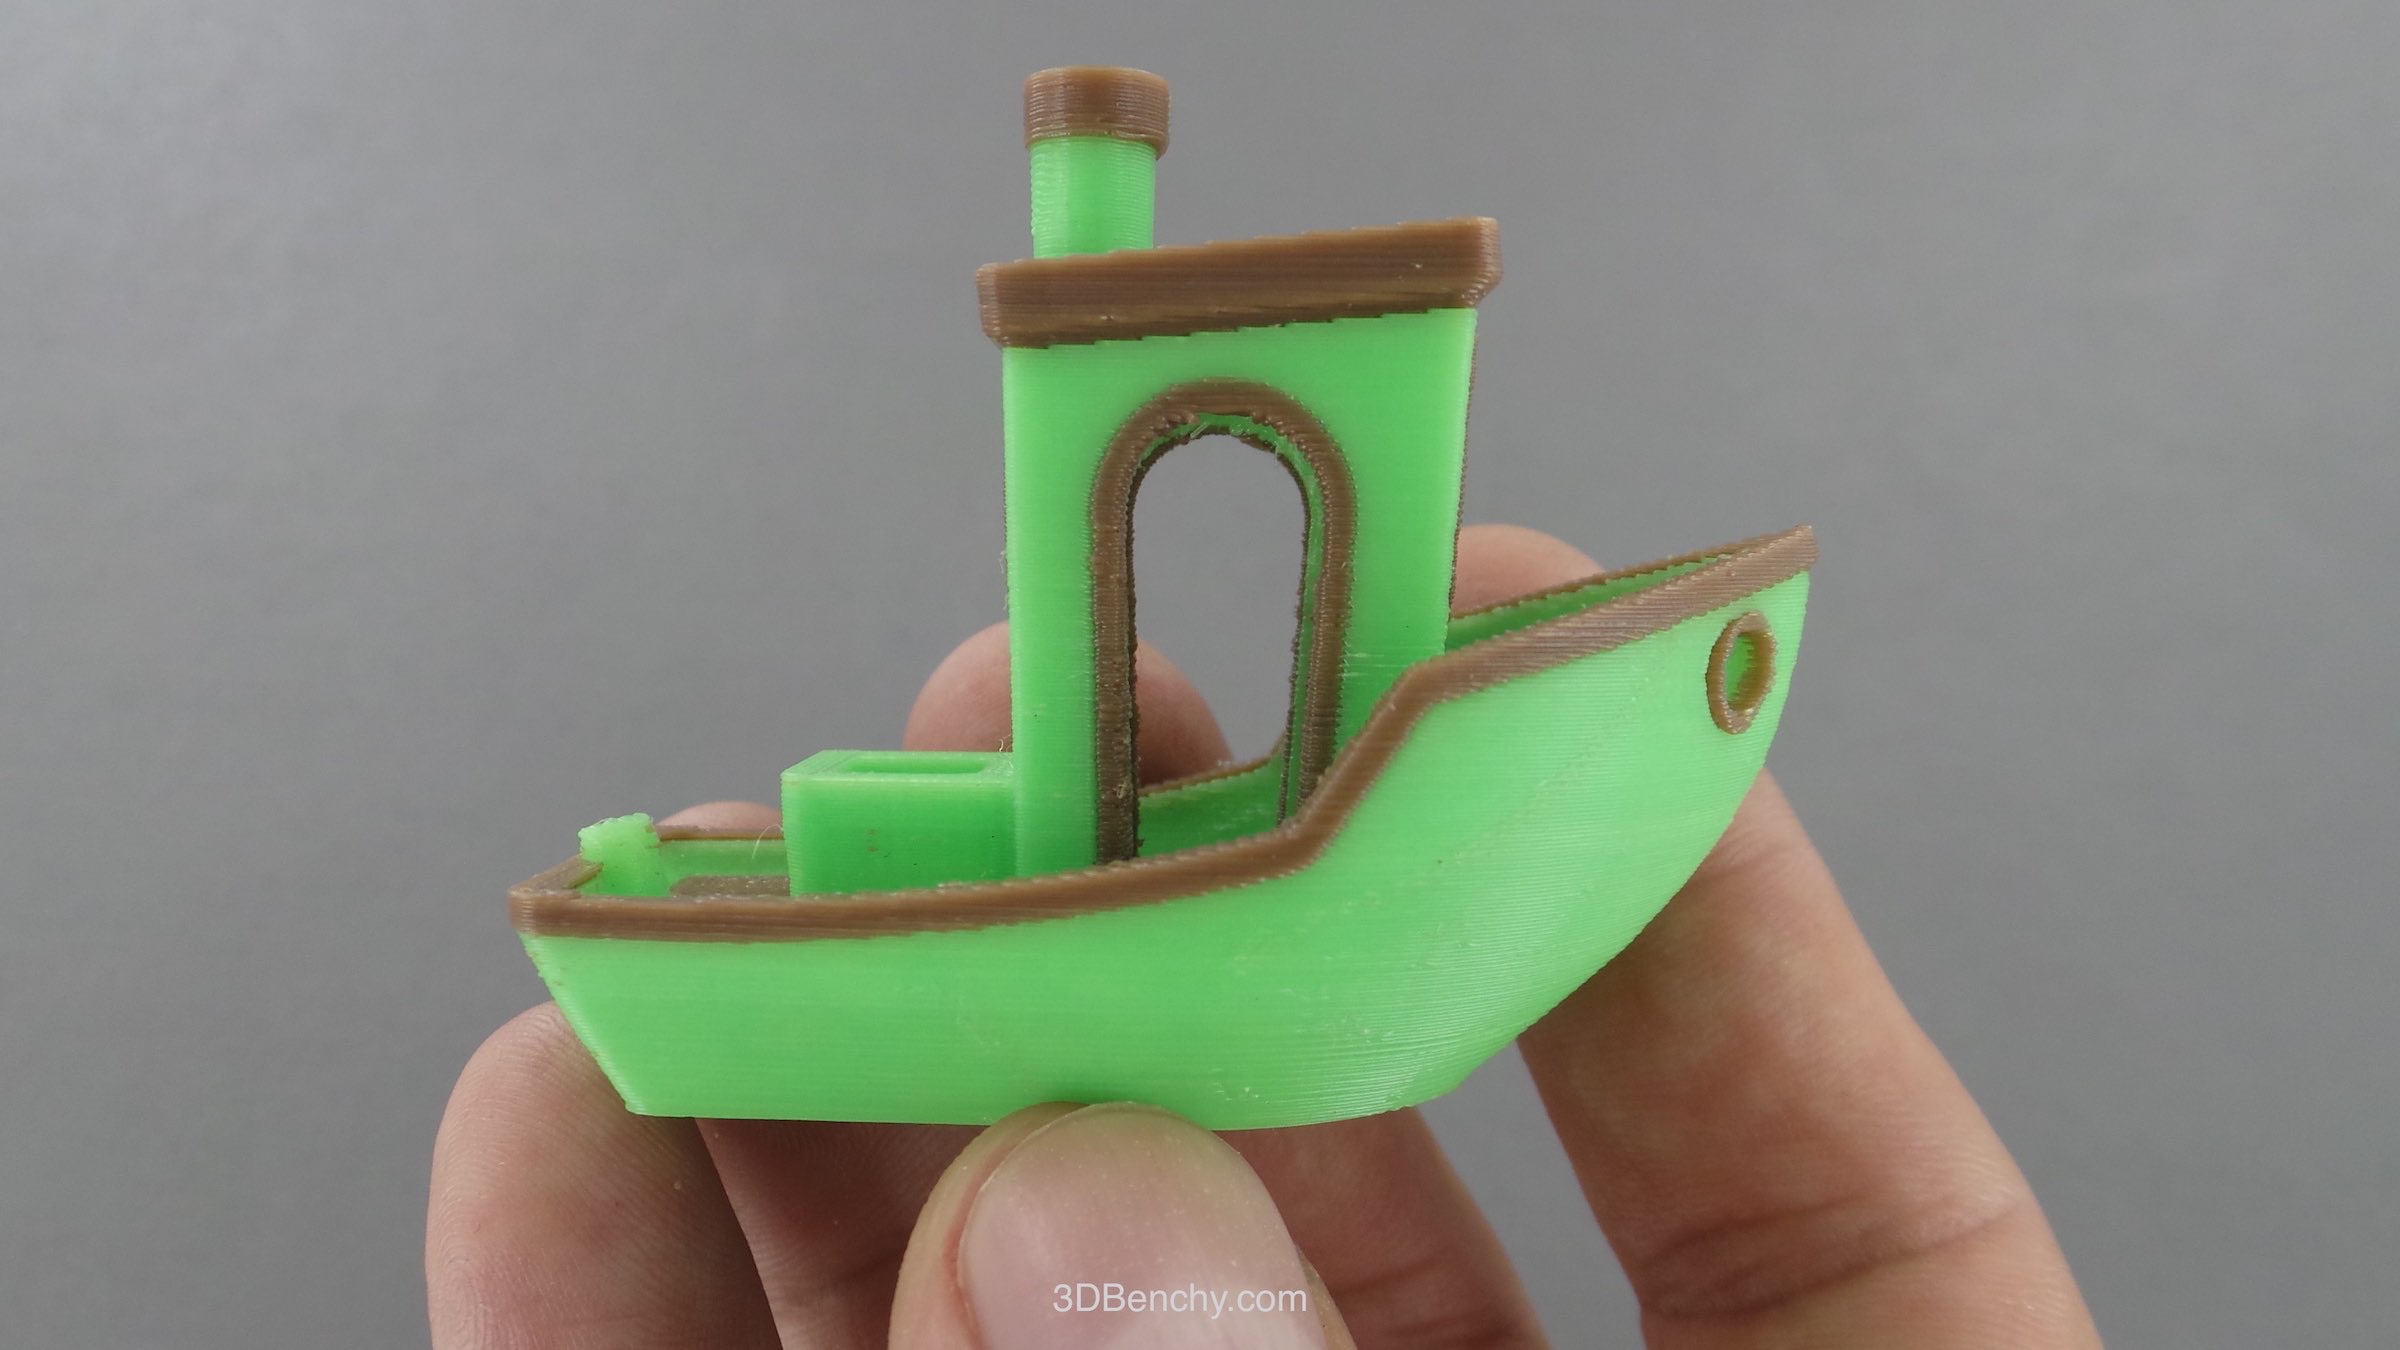 3DBenchy – A Small Giant in the World of Printing – #3DBenchy